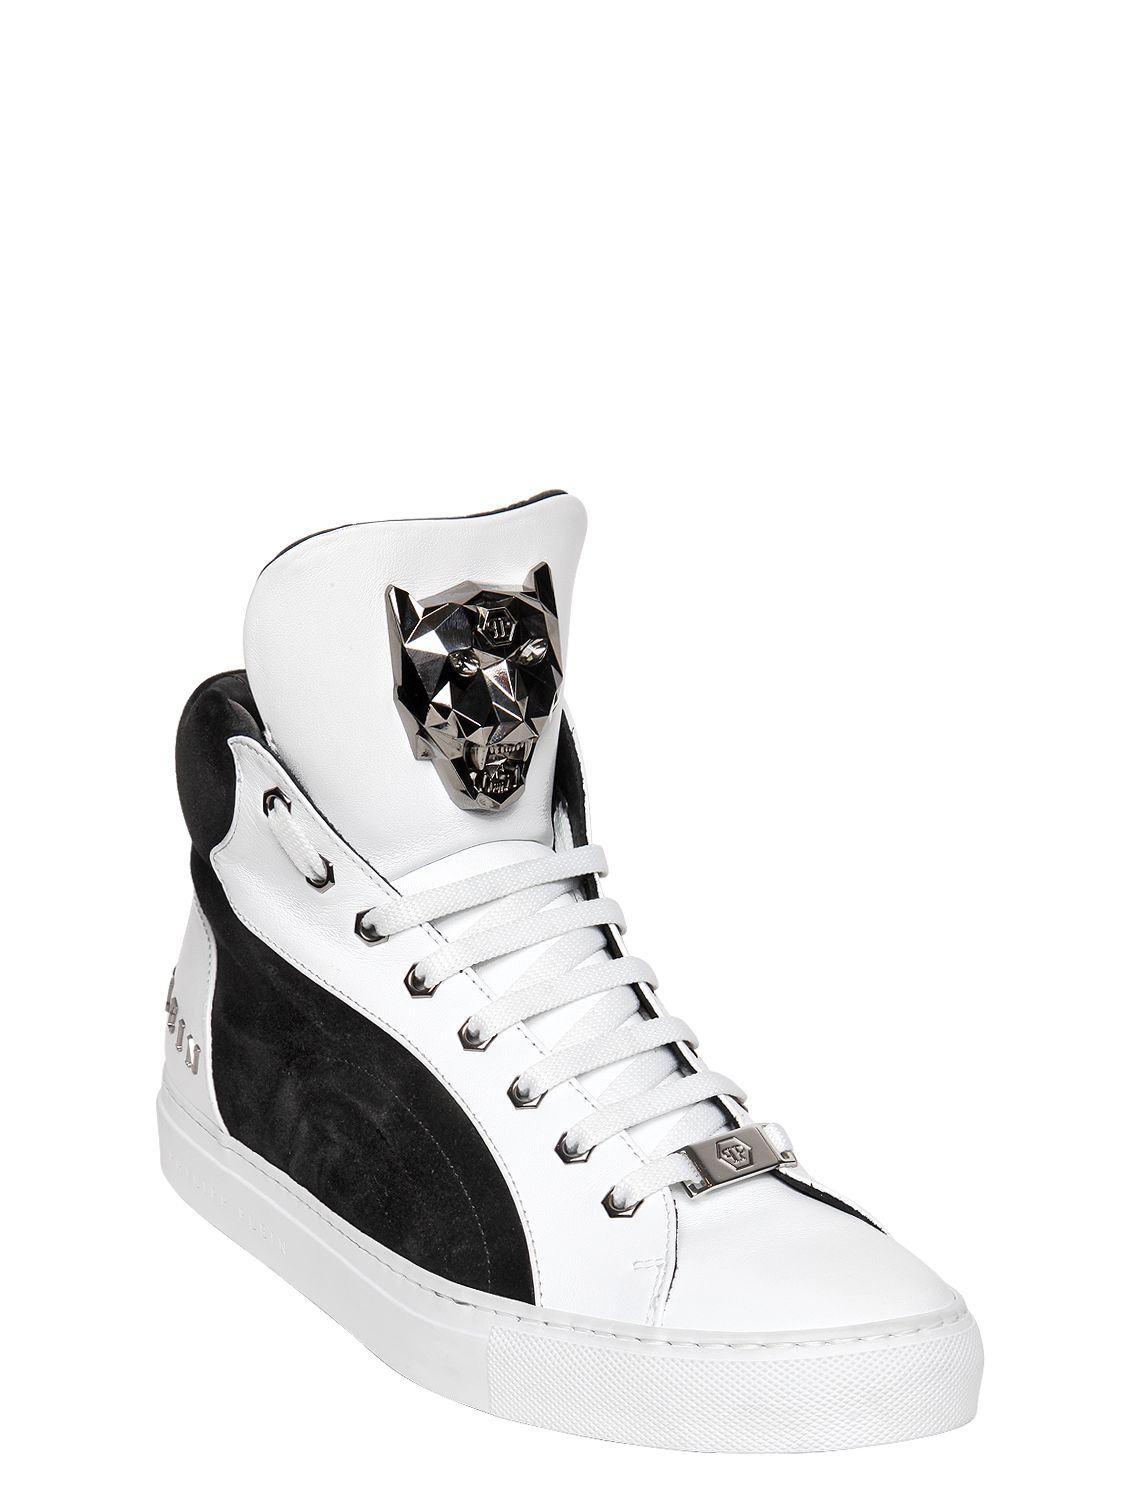 Philipp Plein Suede & Leather High Top Sneakers in White/Black (Black) for  Men - Lyst